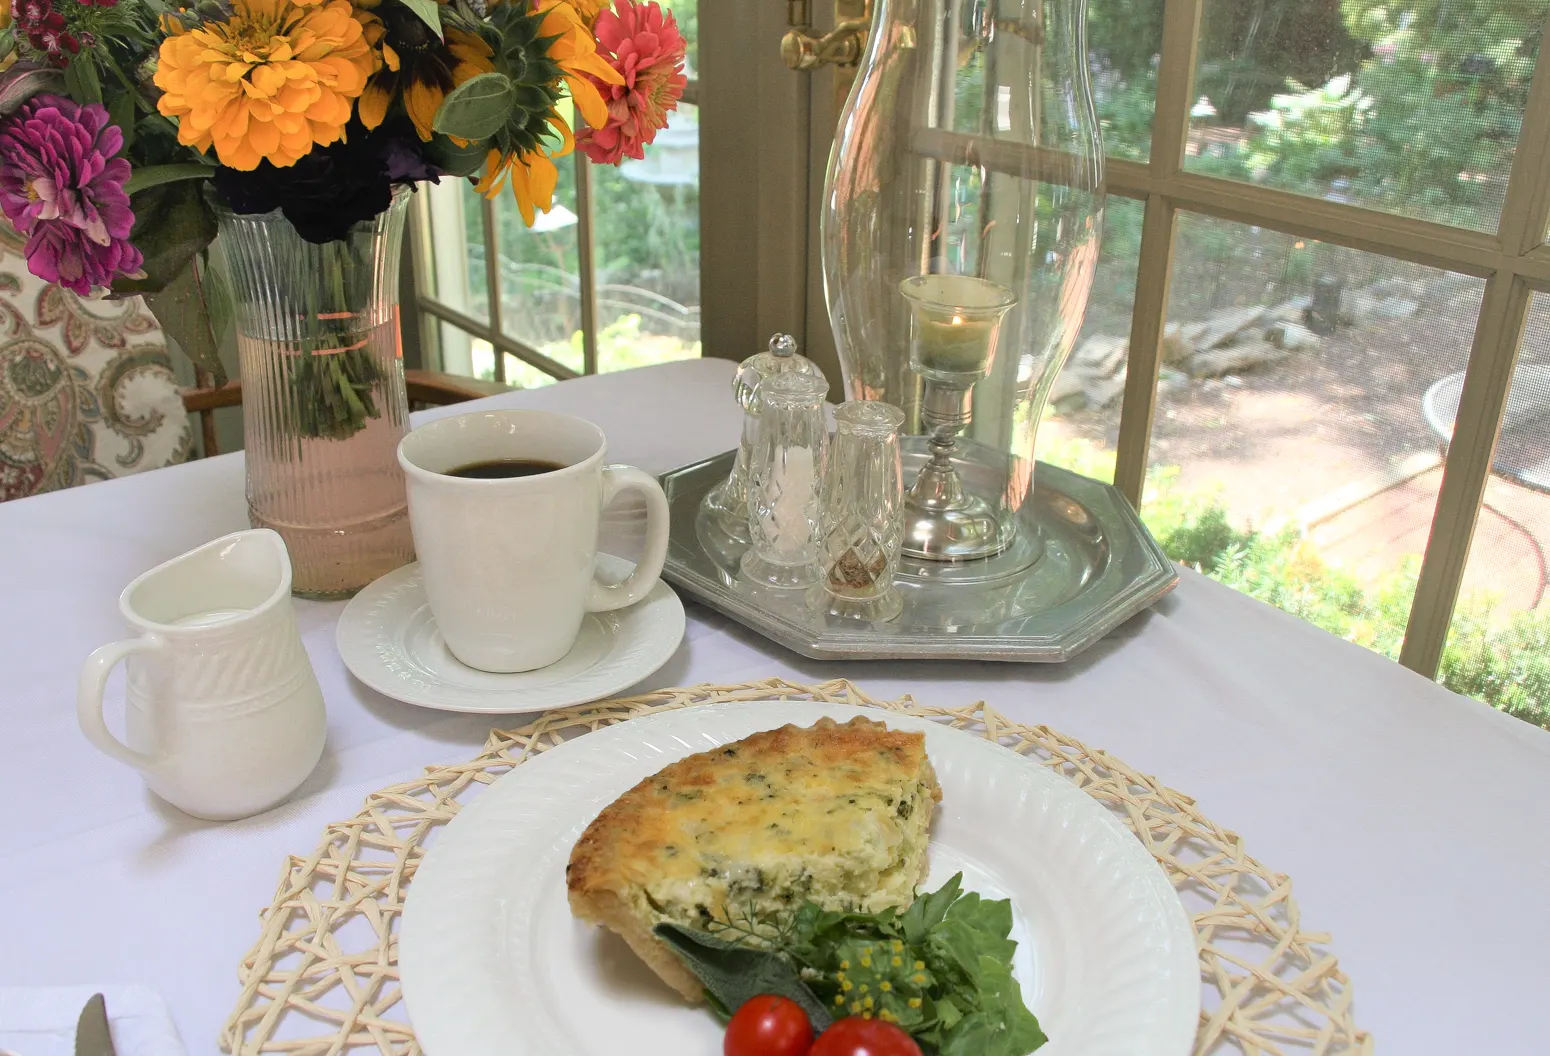 Breakfast table quiche and coffee